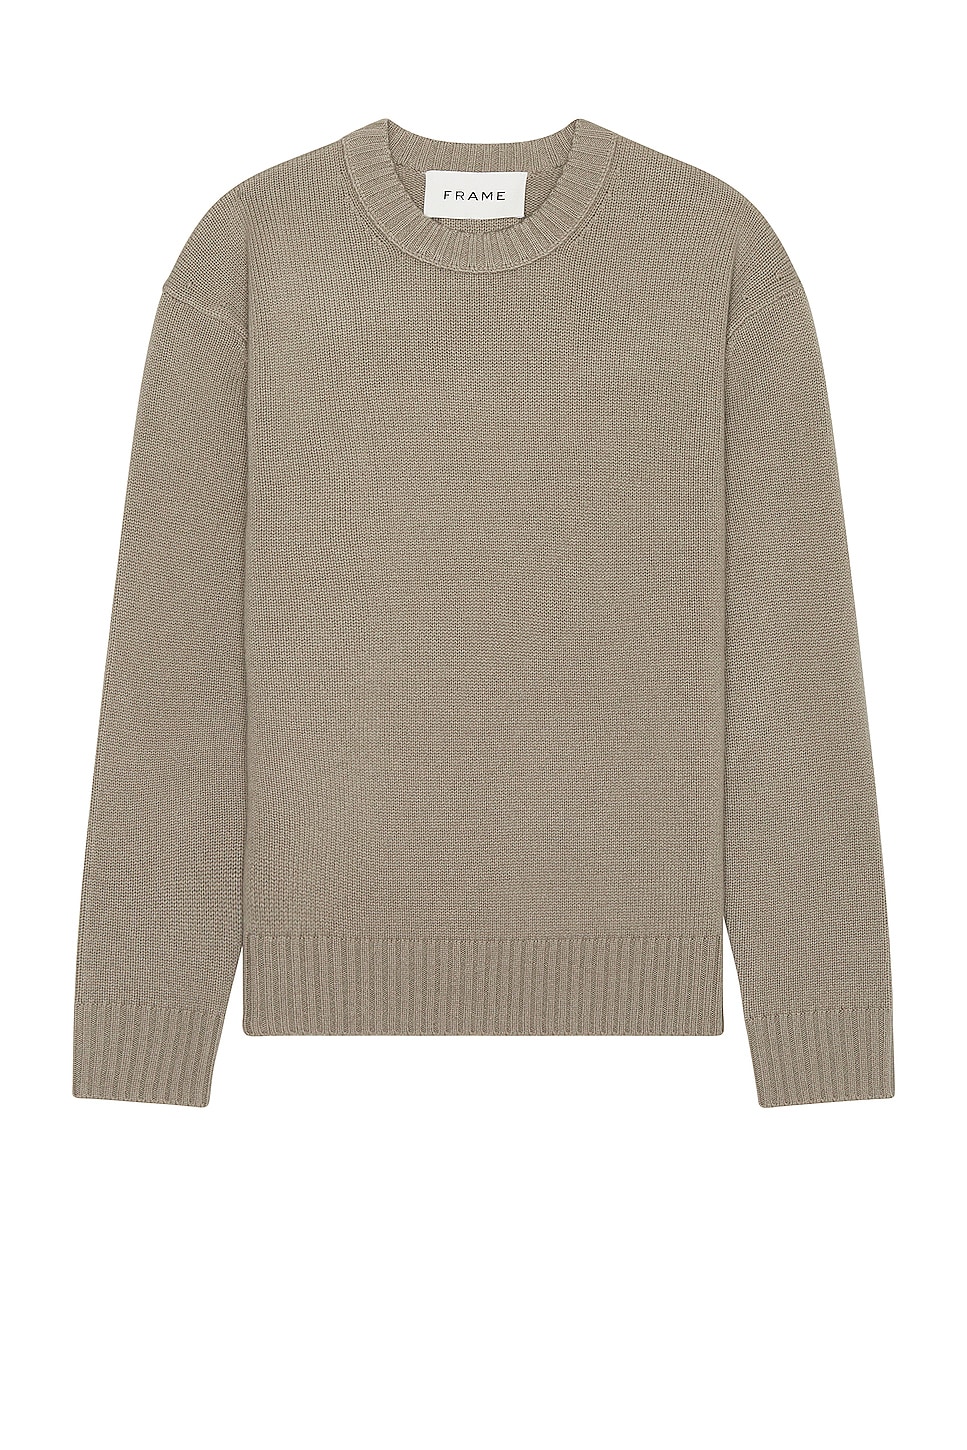 Image 1 of FRAME Cashmere Crew in Stone Beige